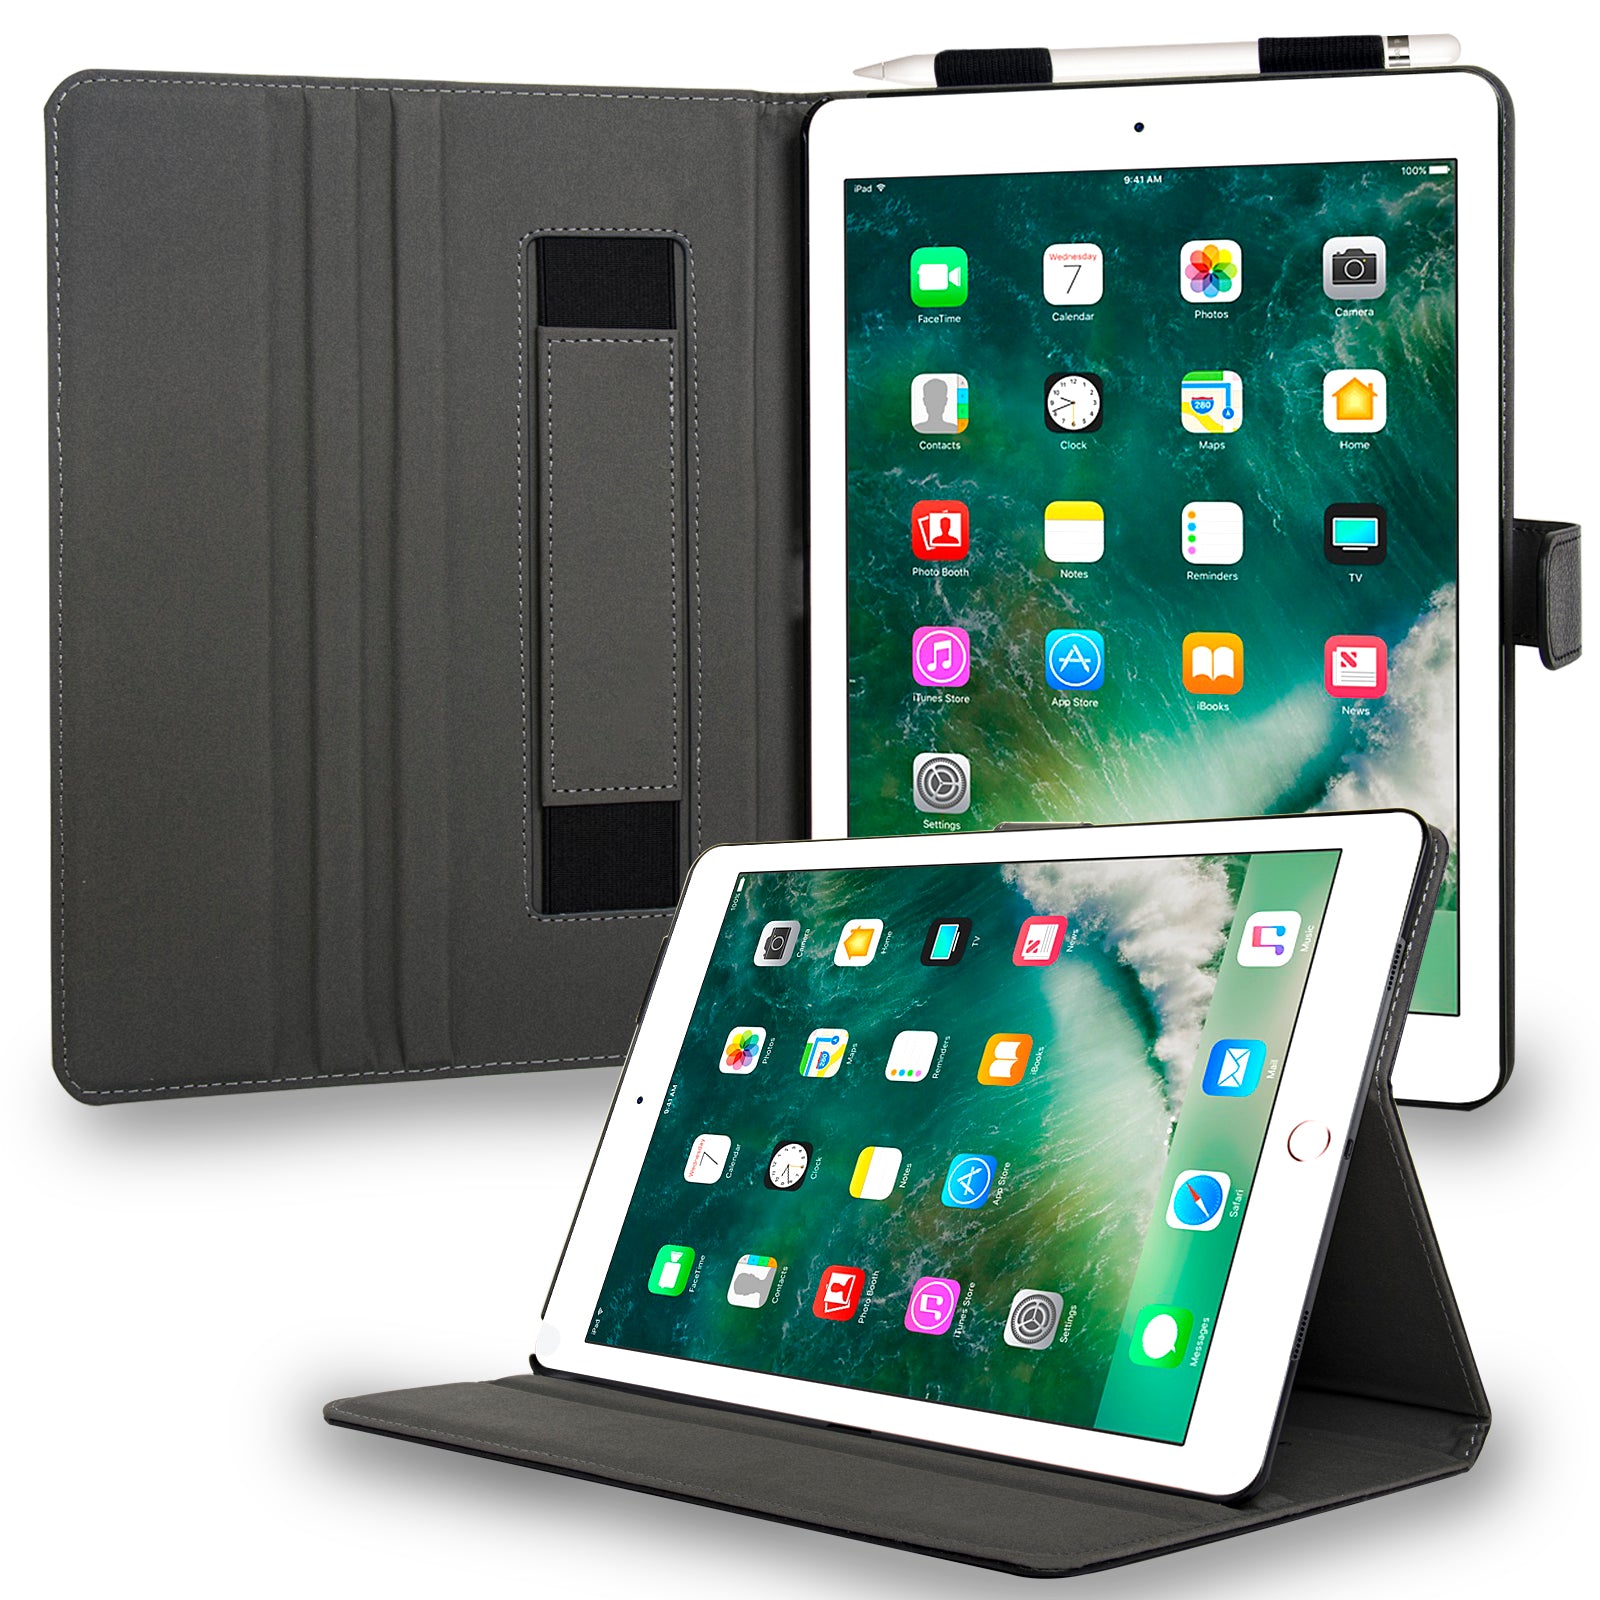 Navor Leather Case Of iPad Pro 10.5 with Kickstand Function.